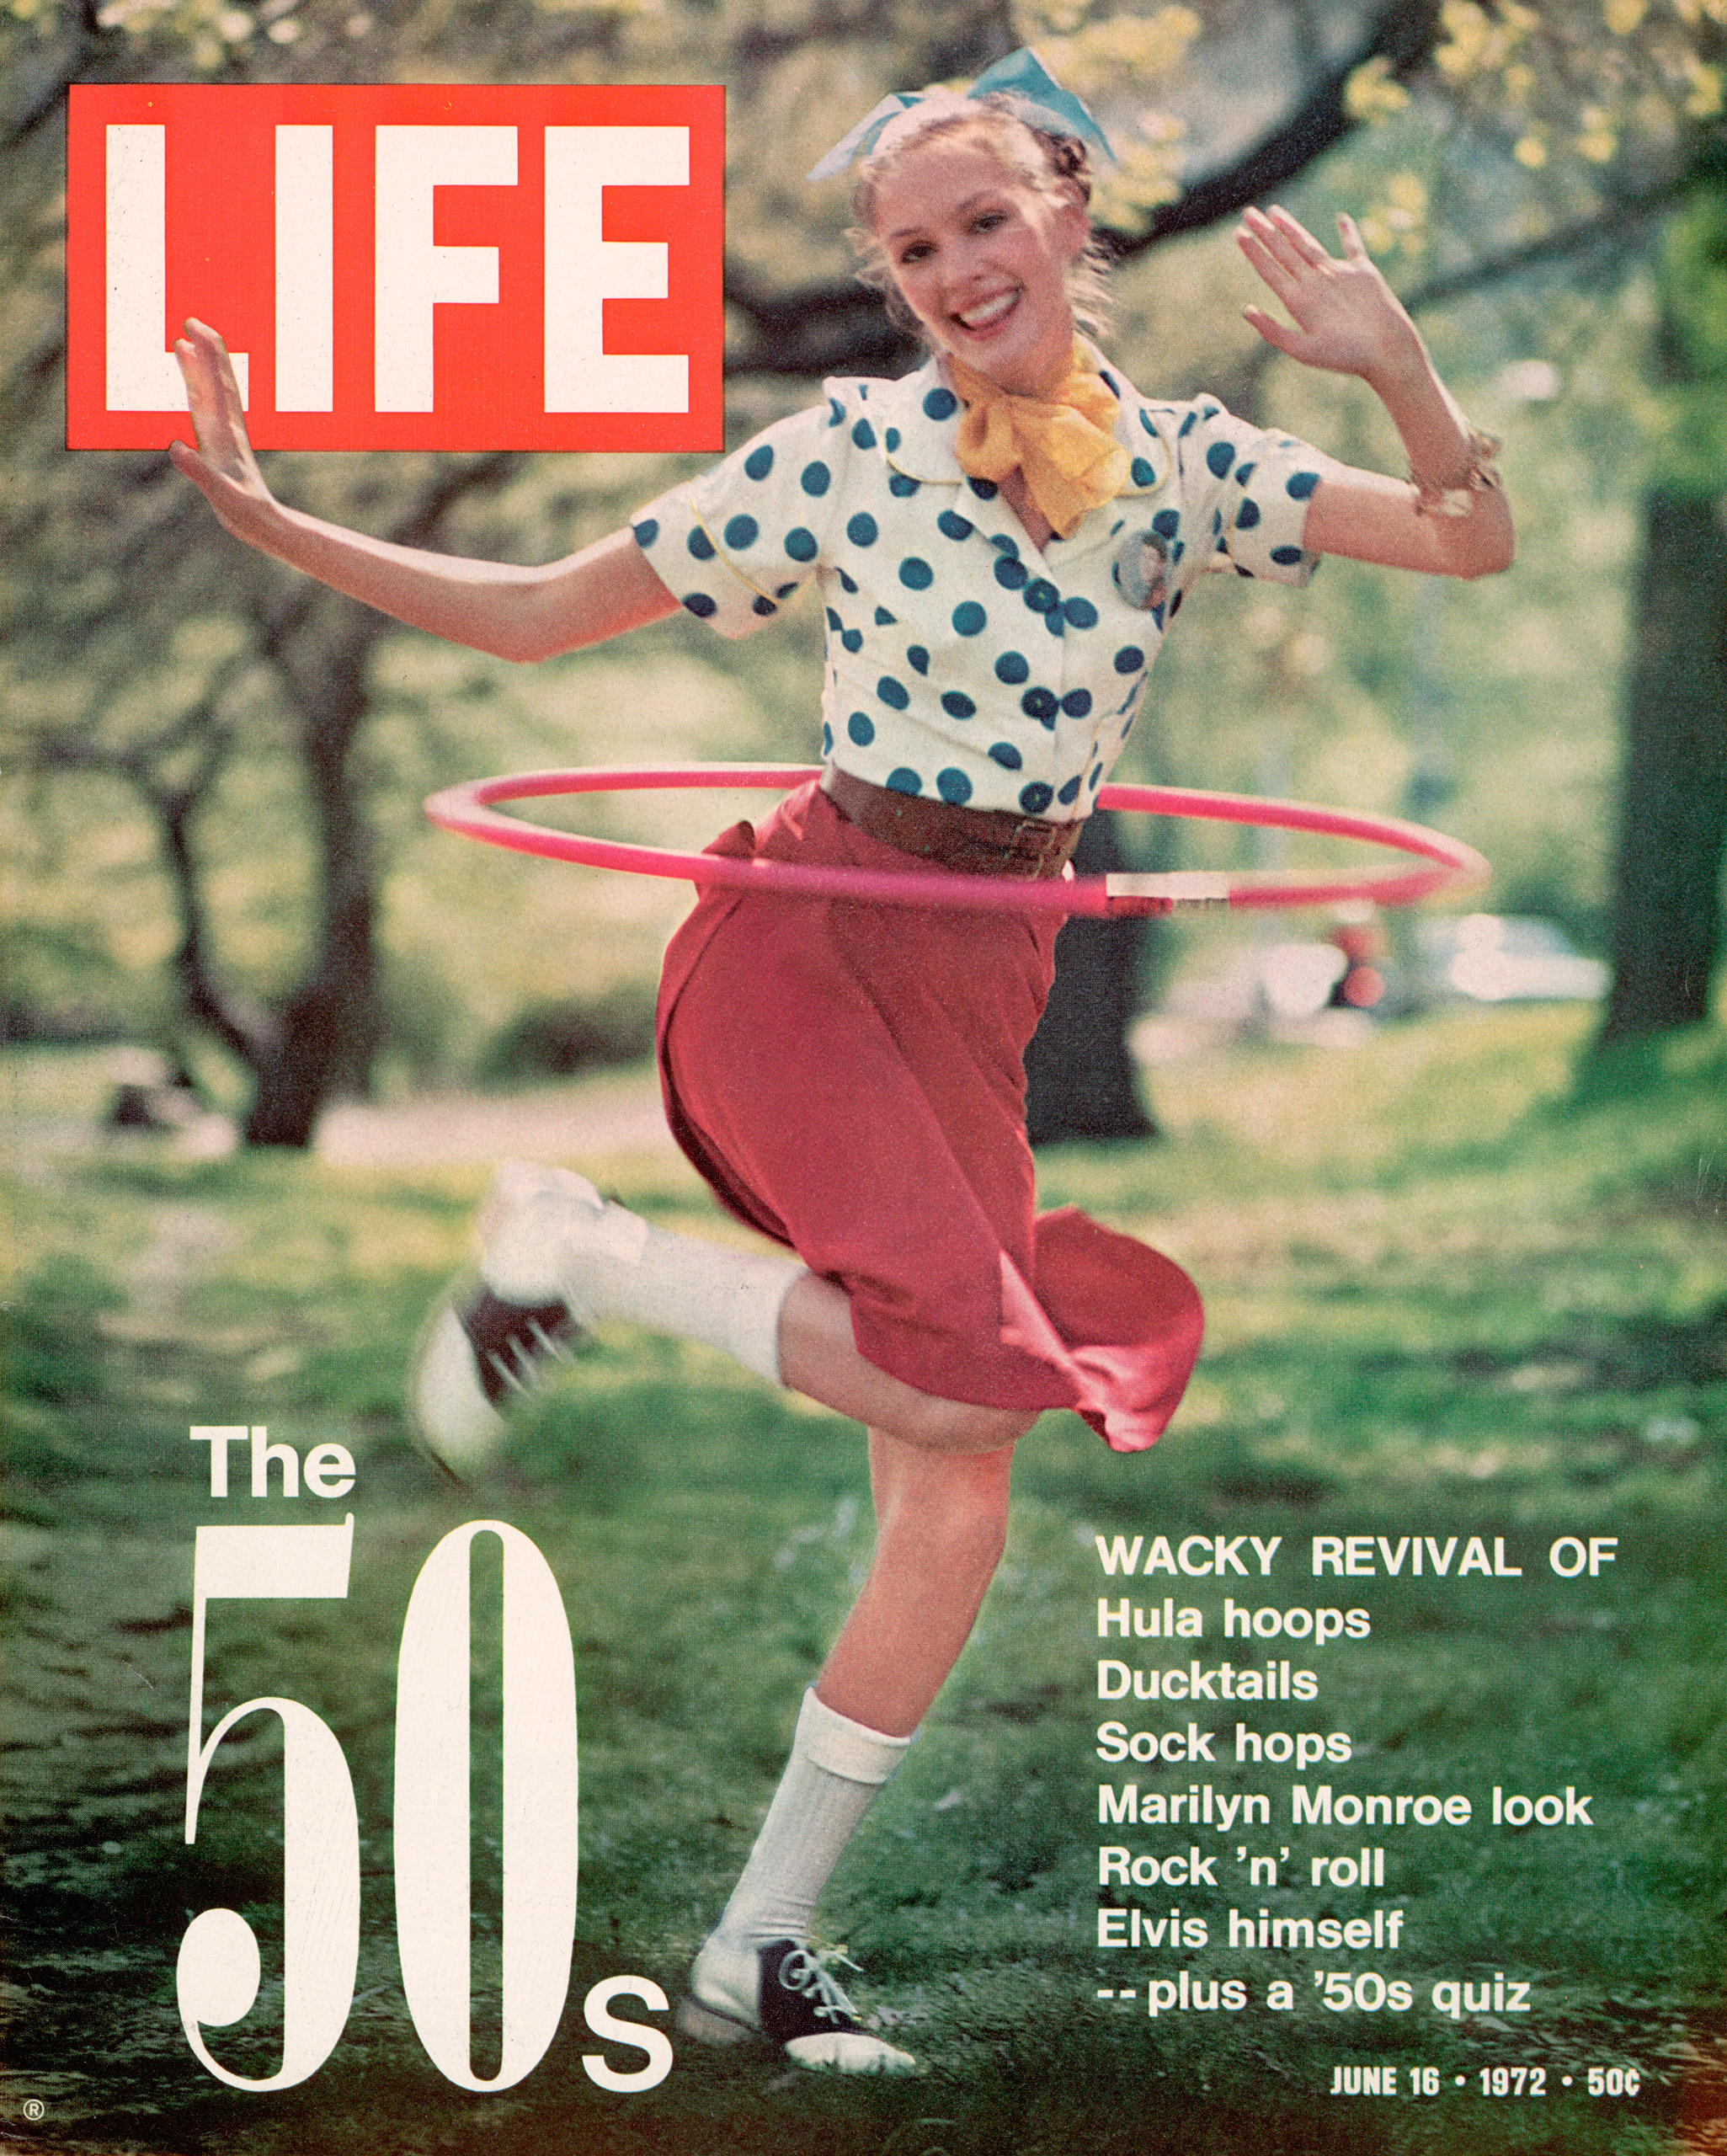 June 18, 1972 cover of LIFE magazine.